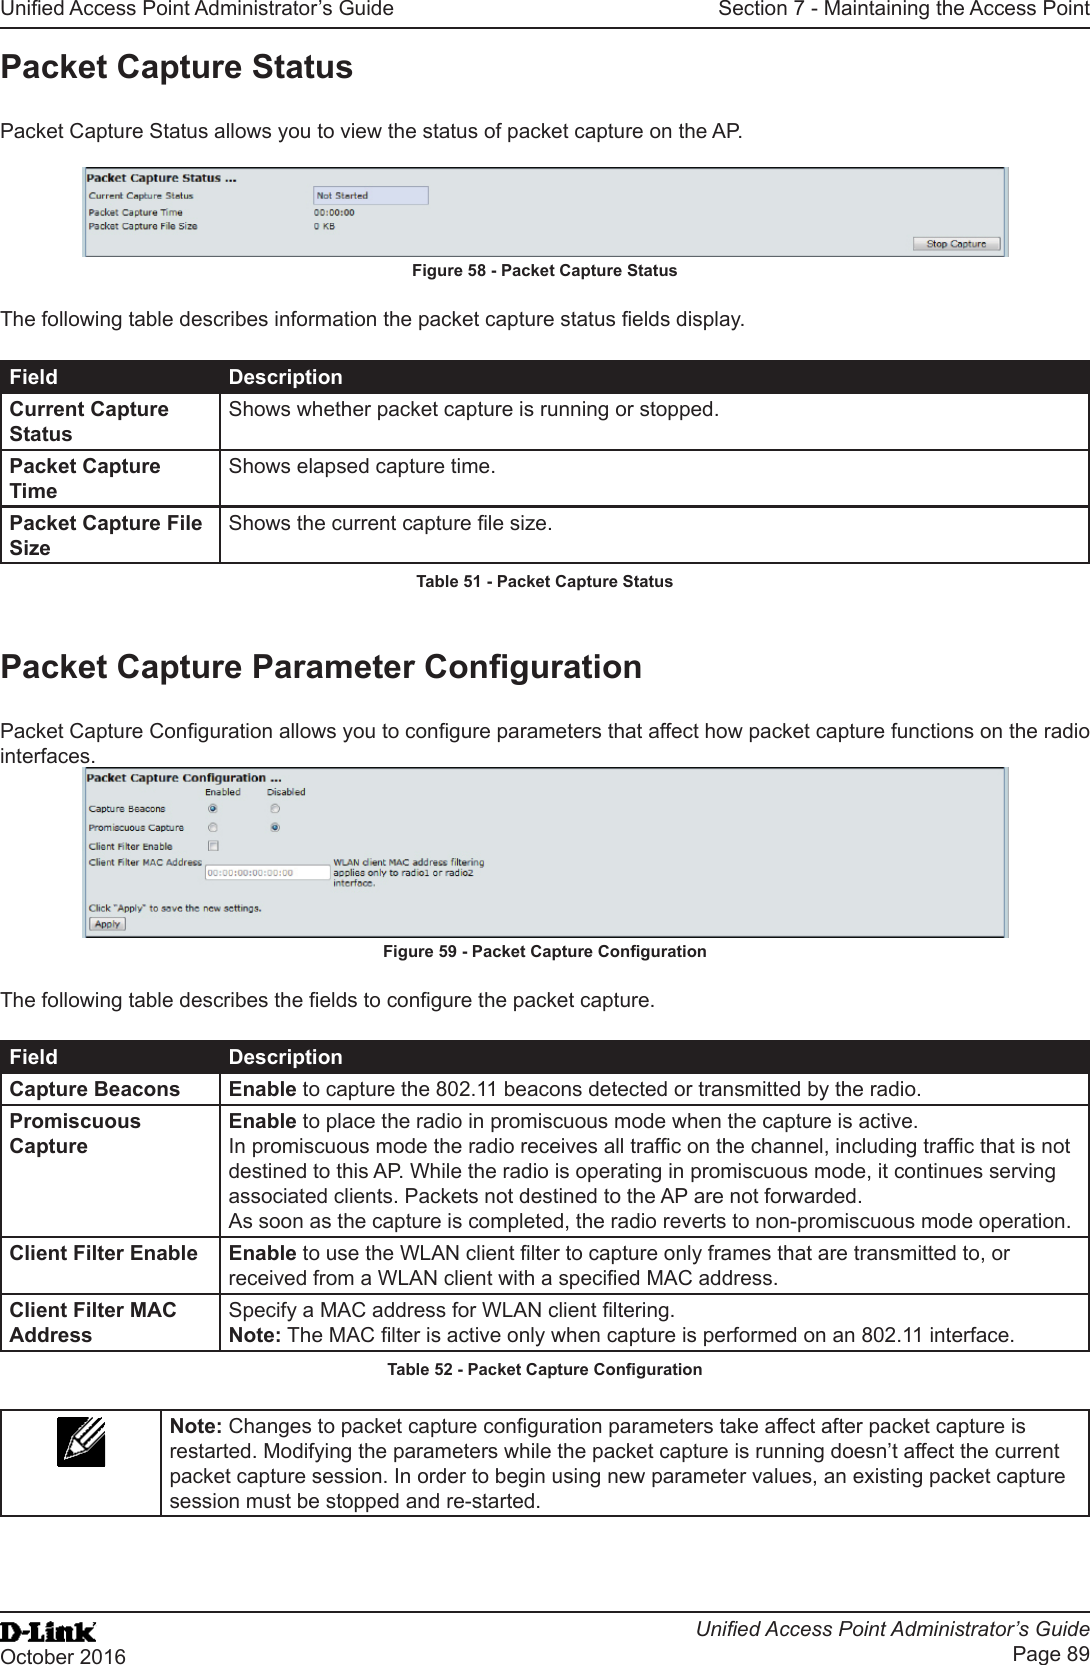 Unied Access Point Administrator’s GuideUnied Access Point Administrator’s GuidePage 89October 2016Section 7 - Maintaining the Access PointPacket Capture StatusPacket Capture Status allows you to view the status of packet capture on the AP.Figure 58 - Packet Capture StatusThe following table describes information the packet capture status elds display.Field DescriptionCurrent Capture StatusShows whether packet capture is running or stopped.Packet Capture TimeShows elapsed capture time.Packet Capture File SizeShows the current capture le size.Table 51 - Packet Capture StatusPacket Capture Parameter CongurationPacket Capture Conguration allows you to congure parameters that affect how packet capture functions on the radio interfaces.Figure 59 - Packet Capture CongurationThe following table describes the elds to congure the packet capture.Field DescriptionCapture Beacons Enable to capture the 802.11 beacons detected or transmitted by the radio.Promiscuous CaptureEnable to place the radio in promiscuous mode when the capture is active. In promiscuous mode the radio receives all trafc on the channel, including trafc that is not destined to this AP. While the radio is operating in promiscuous mode, it continues serving associated clients. Packets not destined to the AP are not forwarded. As soon as the capture is completed, the radio reverts to non-promiscuous mode operation.Client Filter Enable Enable to use the WLAN client lter to capture only frames that are transmitted to, or received from a WLAN client with a specied MAC address.Client Filter MAC AddressSpecify a MAC address for WLAN client ltering.Note: The MAC lter is active only when capture is performed on an 802.11 interface.Table 52 - Packet Capture CongurationNote: Changes to packet capture conguration parameters take affect after packet capture is restarted. Modifying the parameters while the packet capture is running doesn’t affect the current packet capture session. In order to begin using new parameter values, an existing packet capture session must be stopped and re-started.